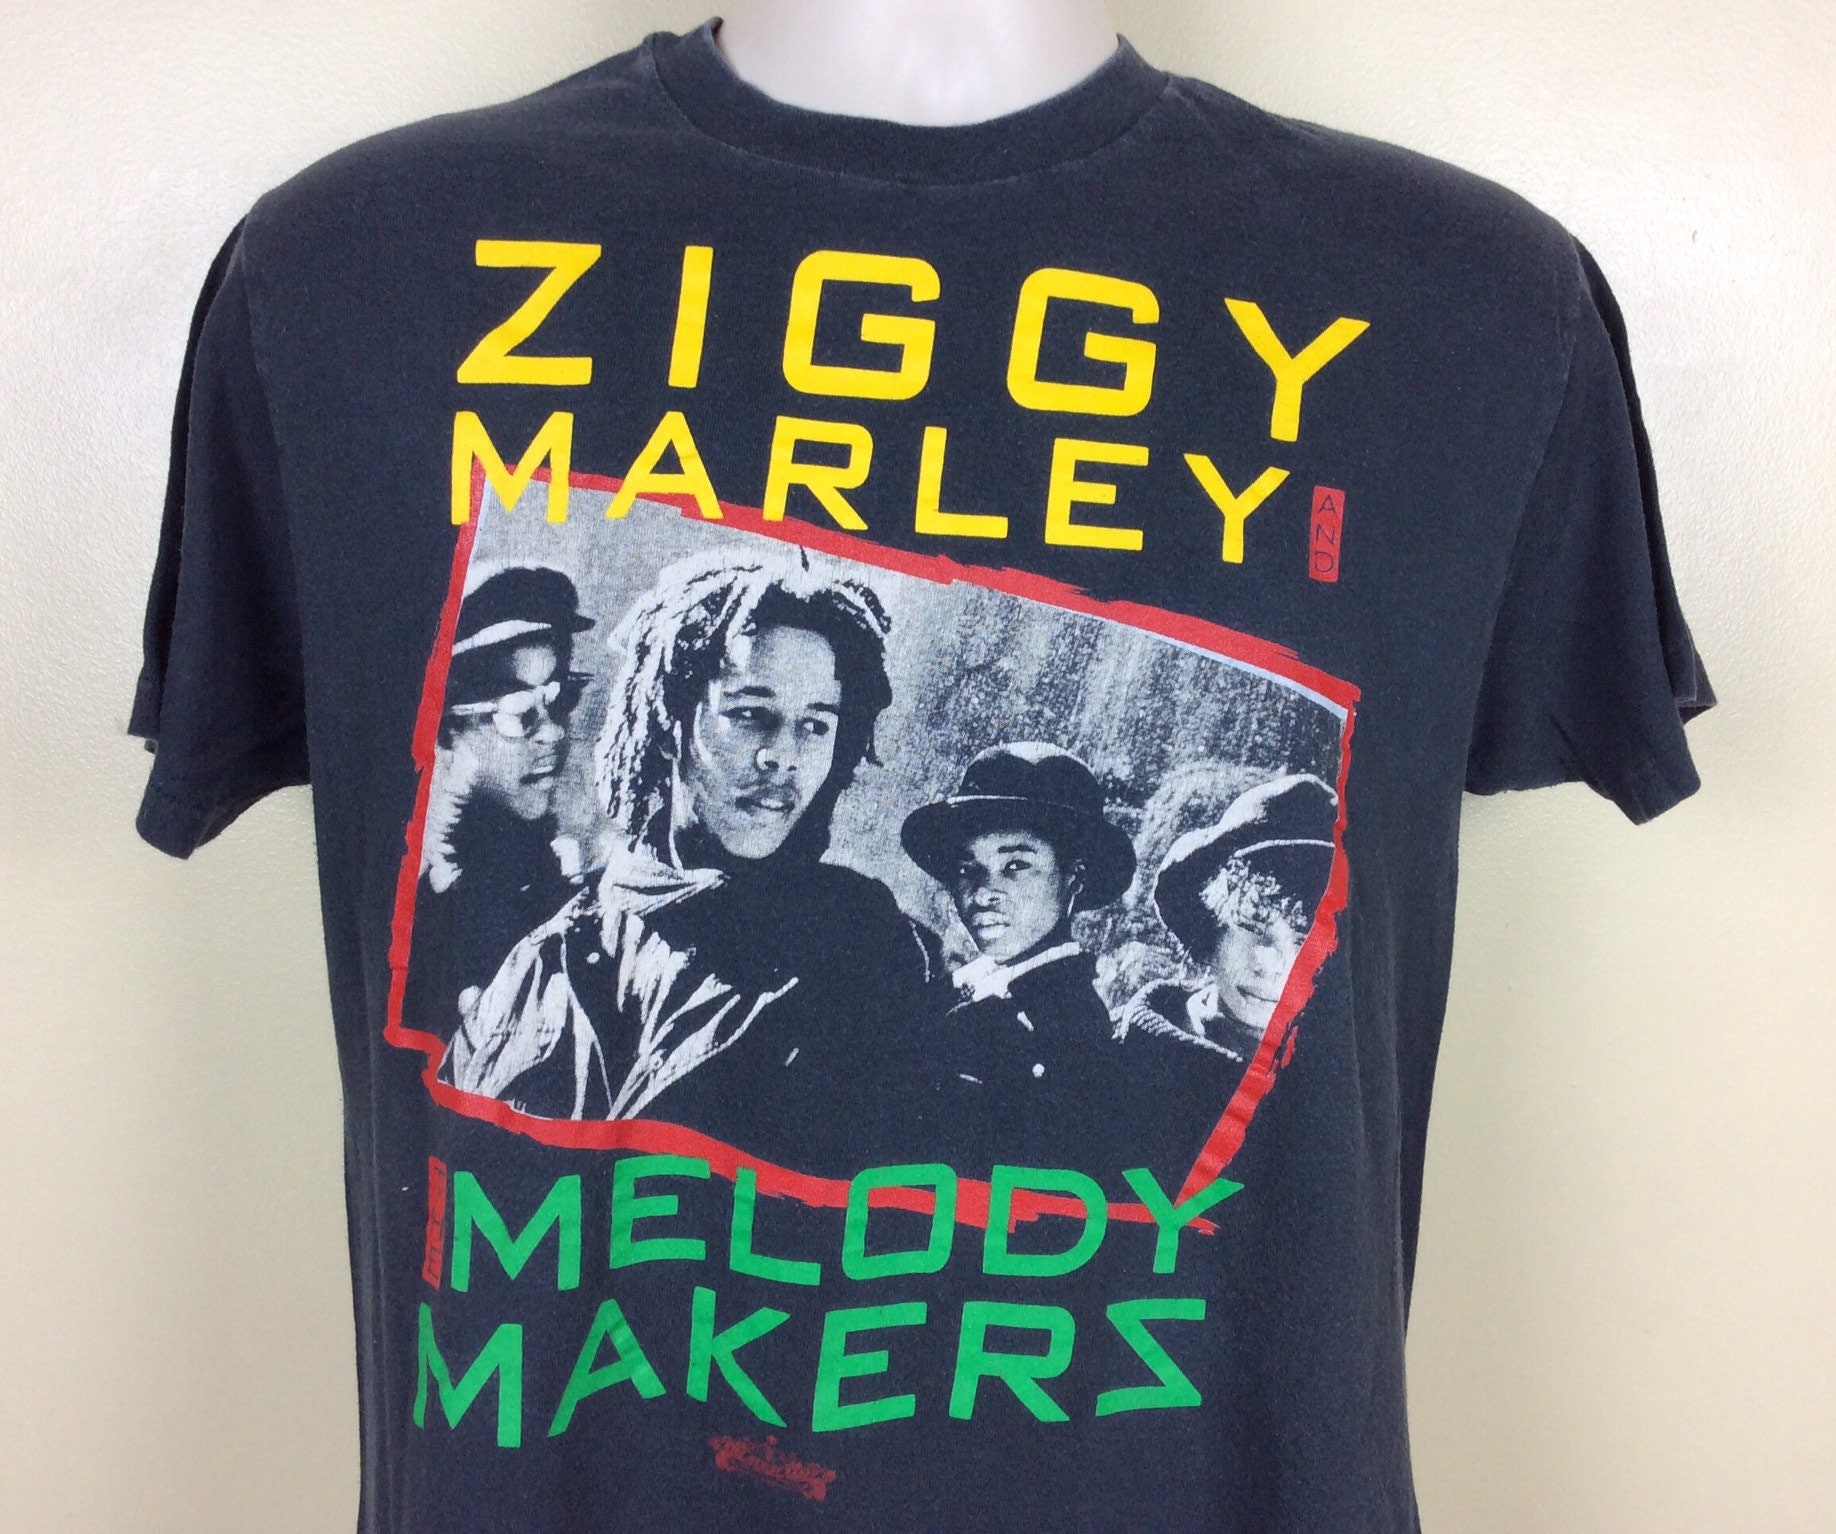 Vtg 80s Ziggy Marley and the Melody Makers T-shirt Black M/L - Etsy